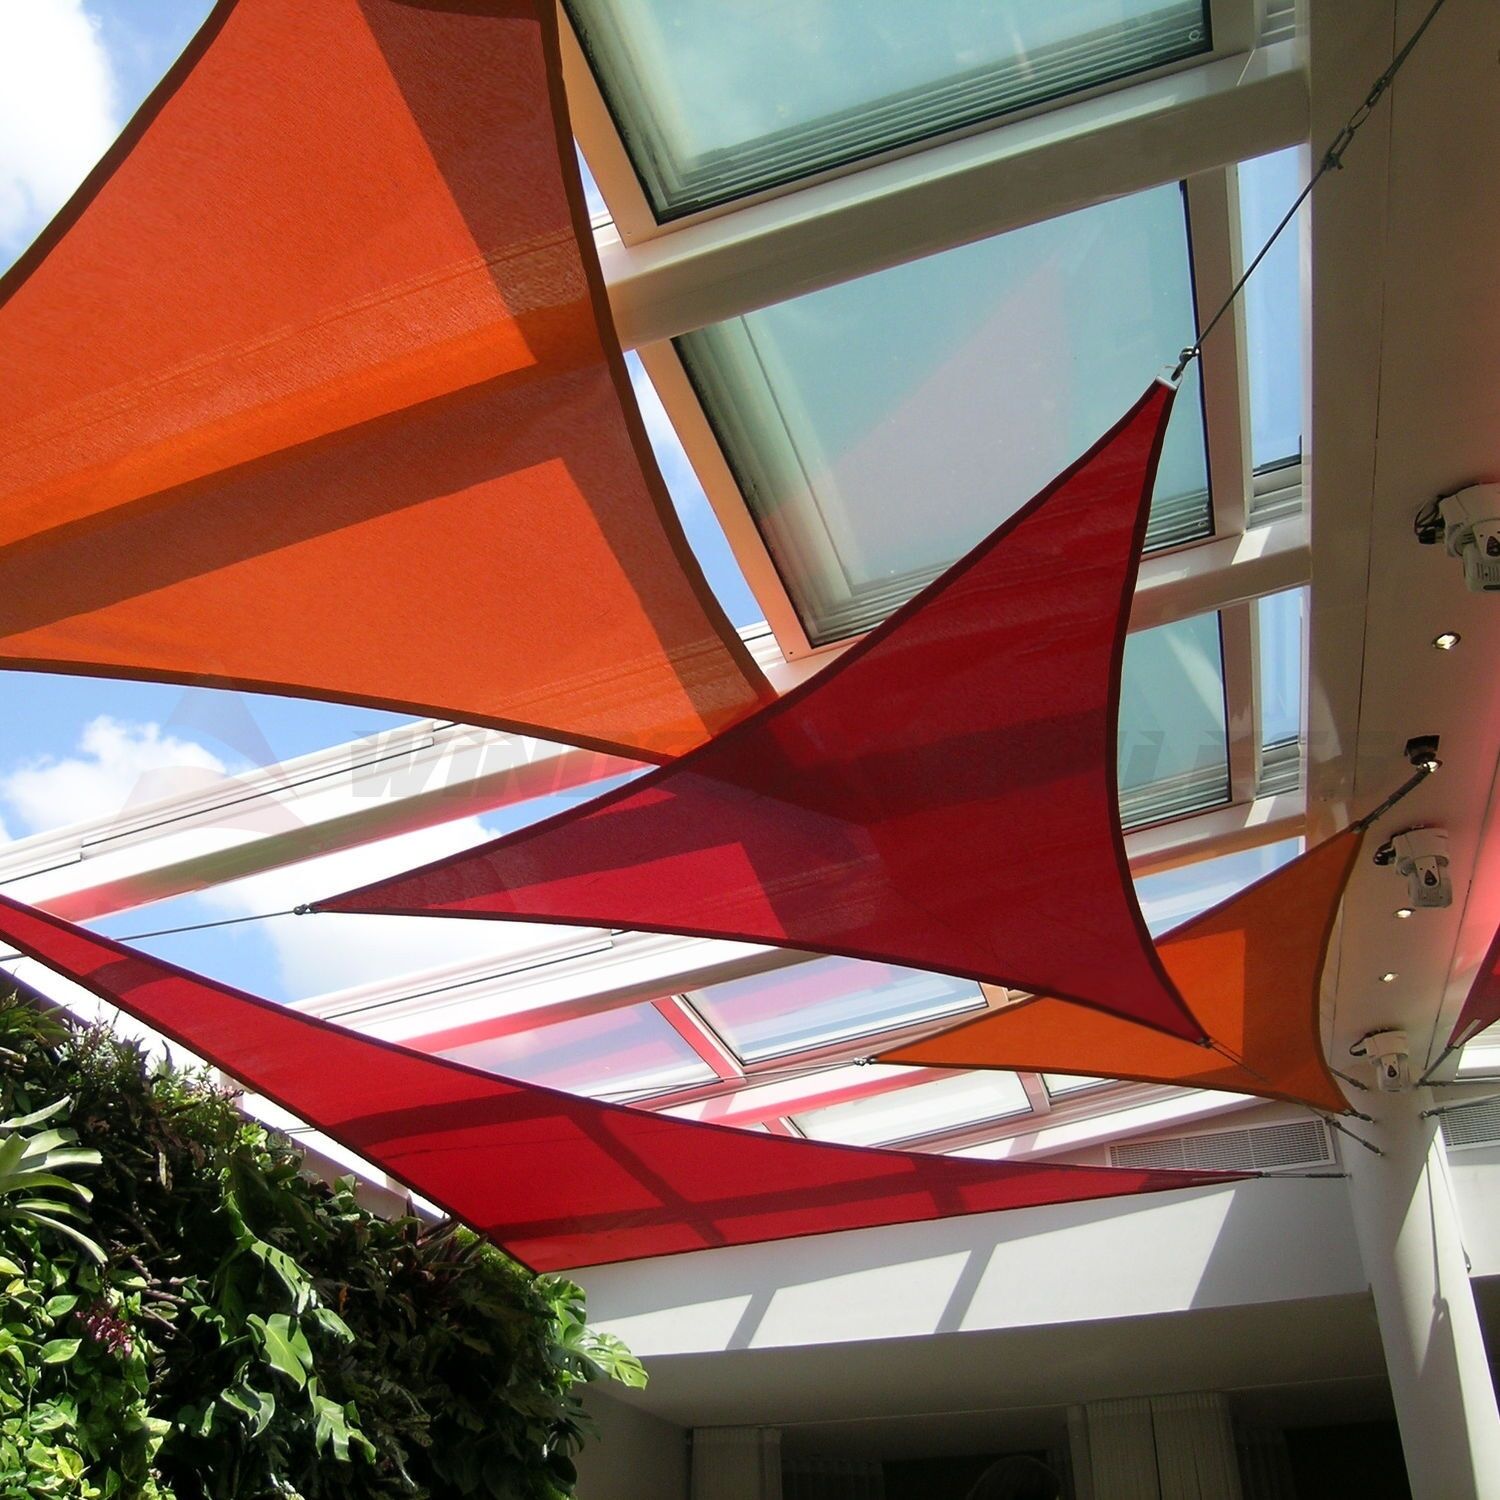 Custom Size equilateral triangle Sun Shade Sail Canopy Awning Patio Pool Cover